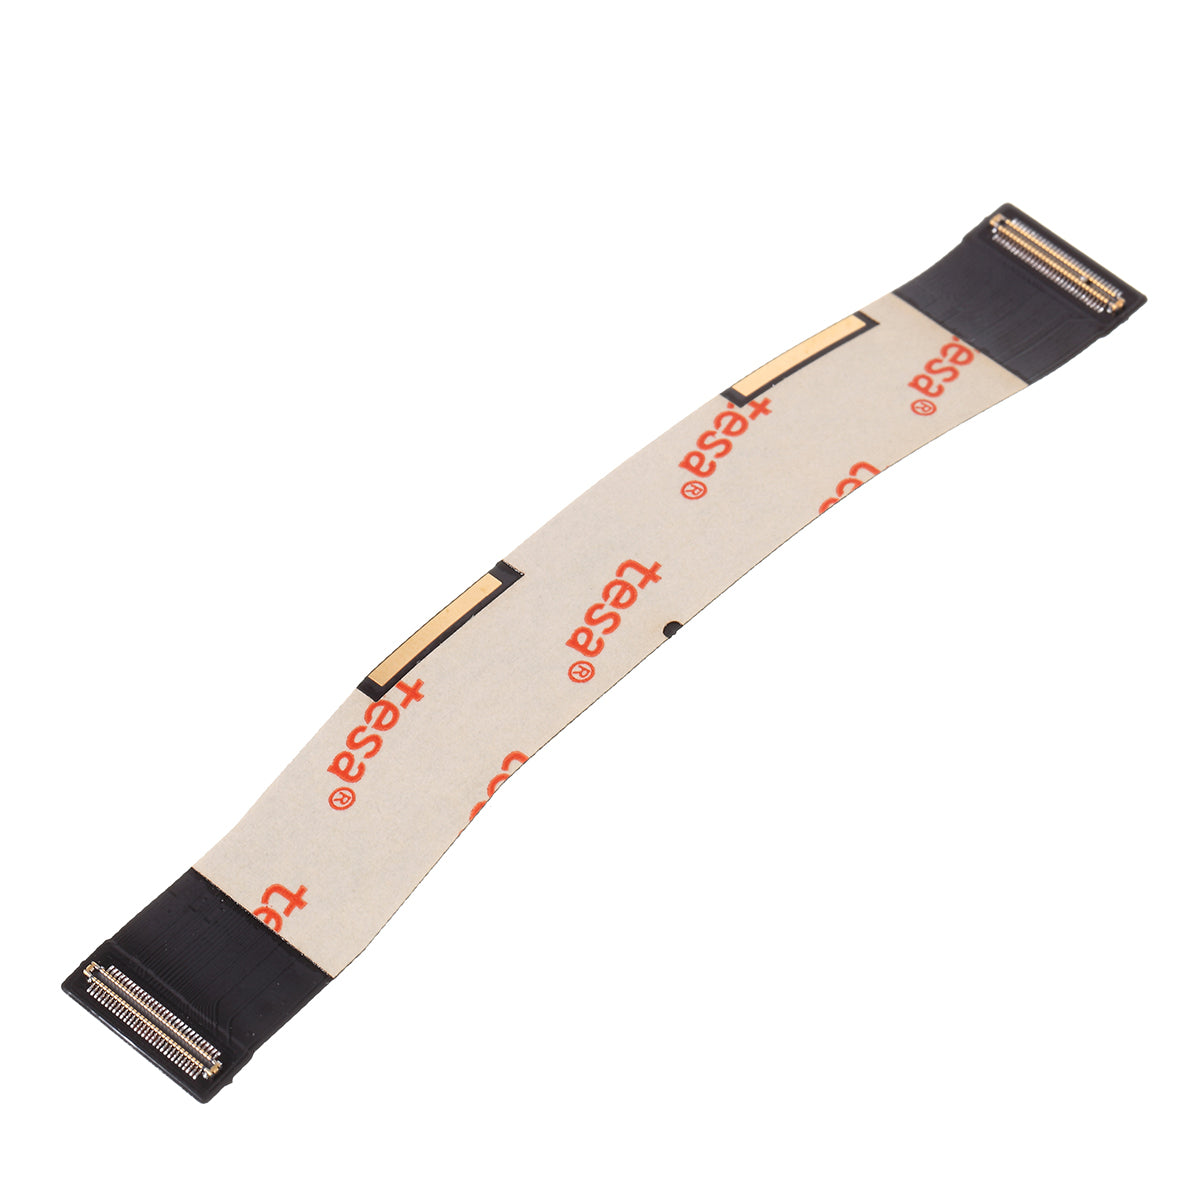 OEM Motherboard Connect Flex Cable Ribbon for Xiaomi Mi 9